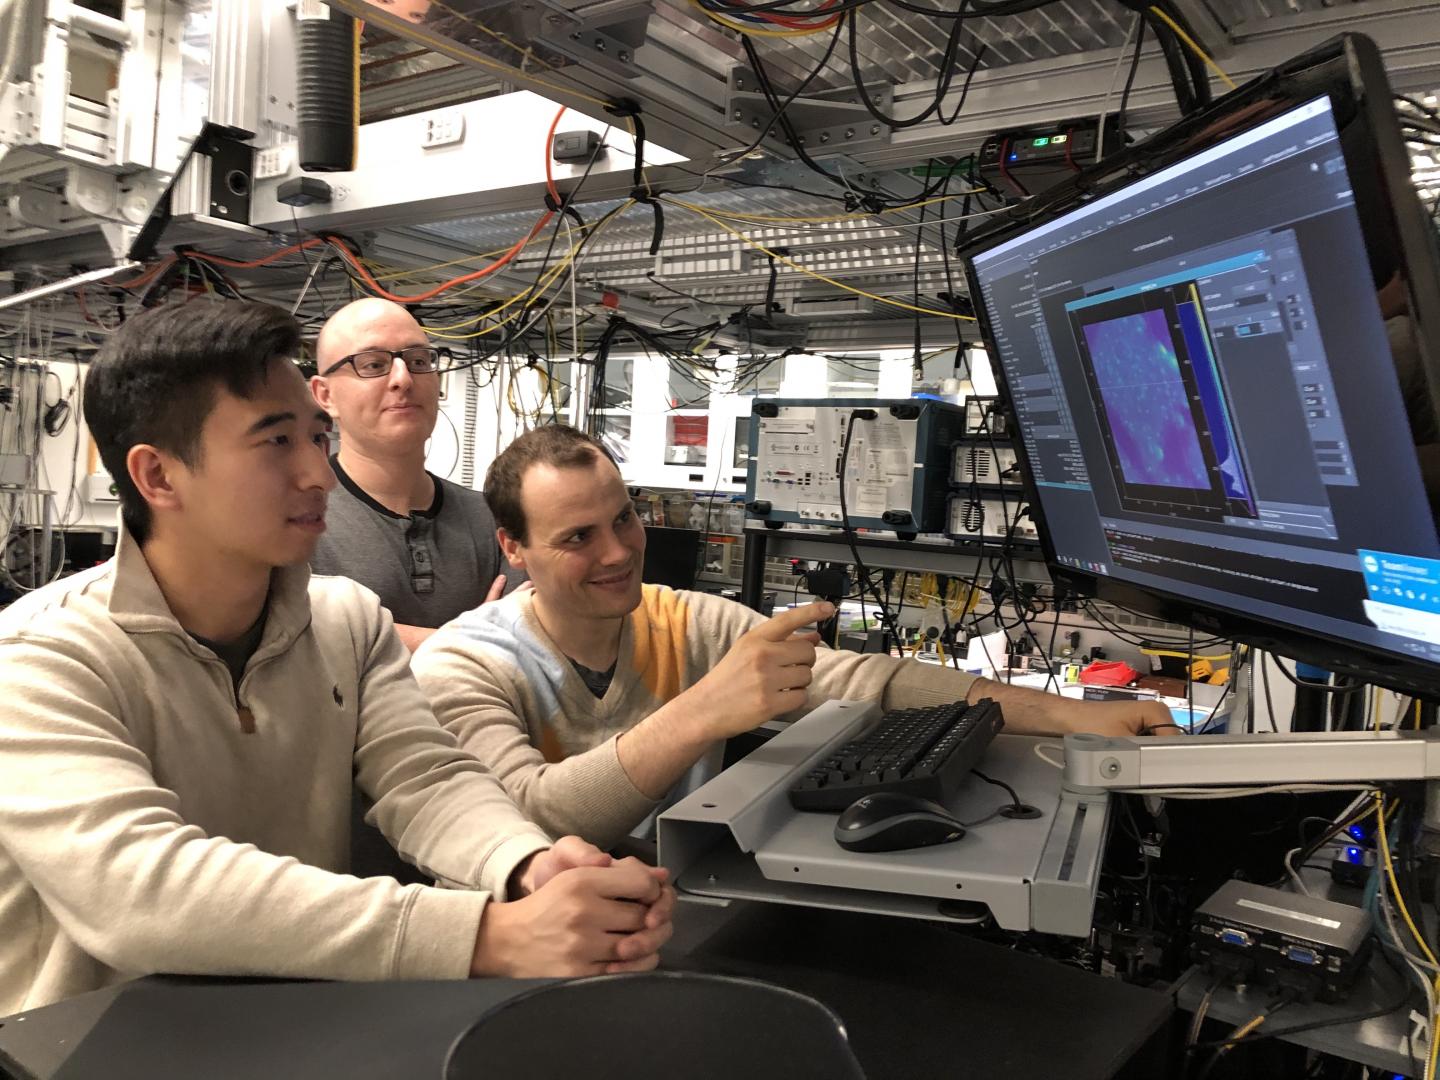 A team of scientists at the University of Chicago's Pritzker School of Molecular Engineering announced the discovery of a simple modification that allows quantum systems to stay operational--or "coherent"--10,000 times longer than before.

CREDIT
University of Chicago